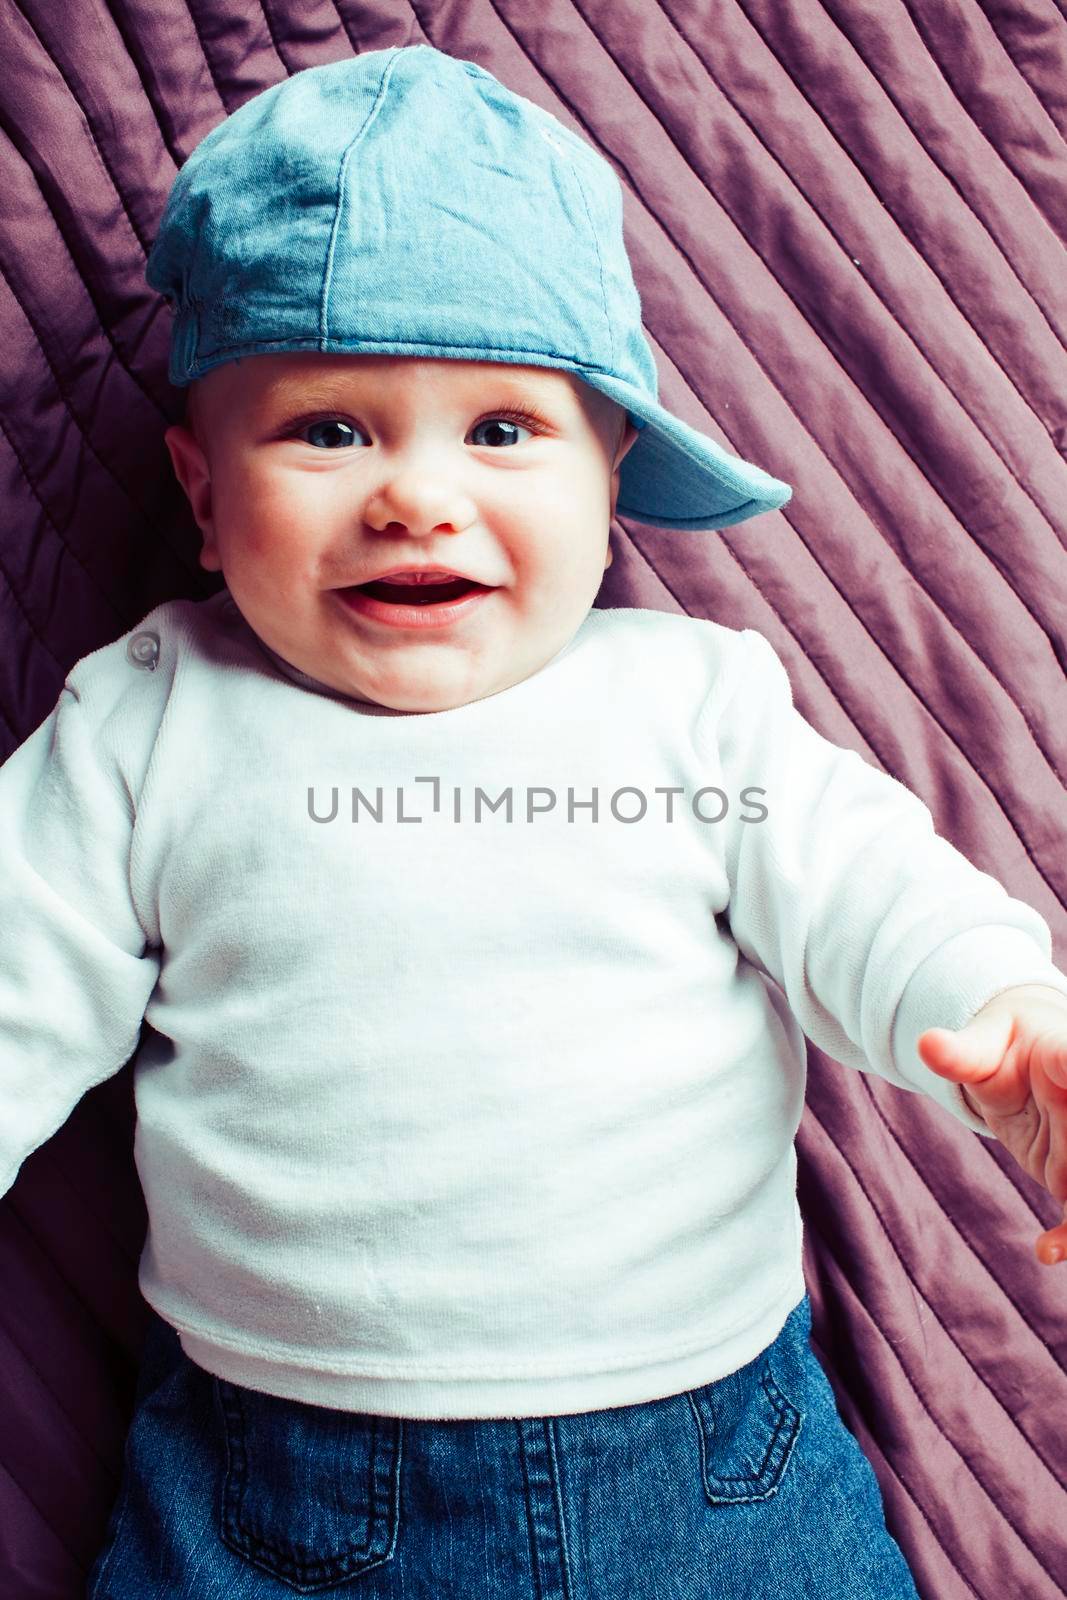 little cute redhead todler in hat happy smiling, lifestyle people concept close up